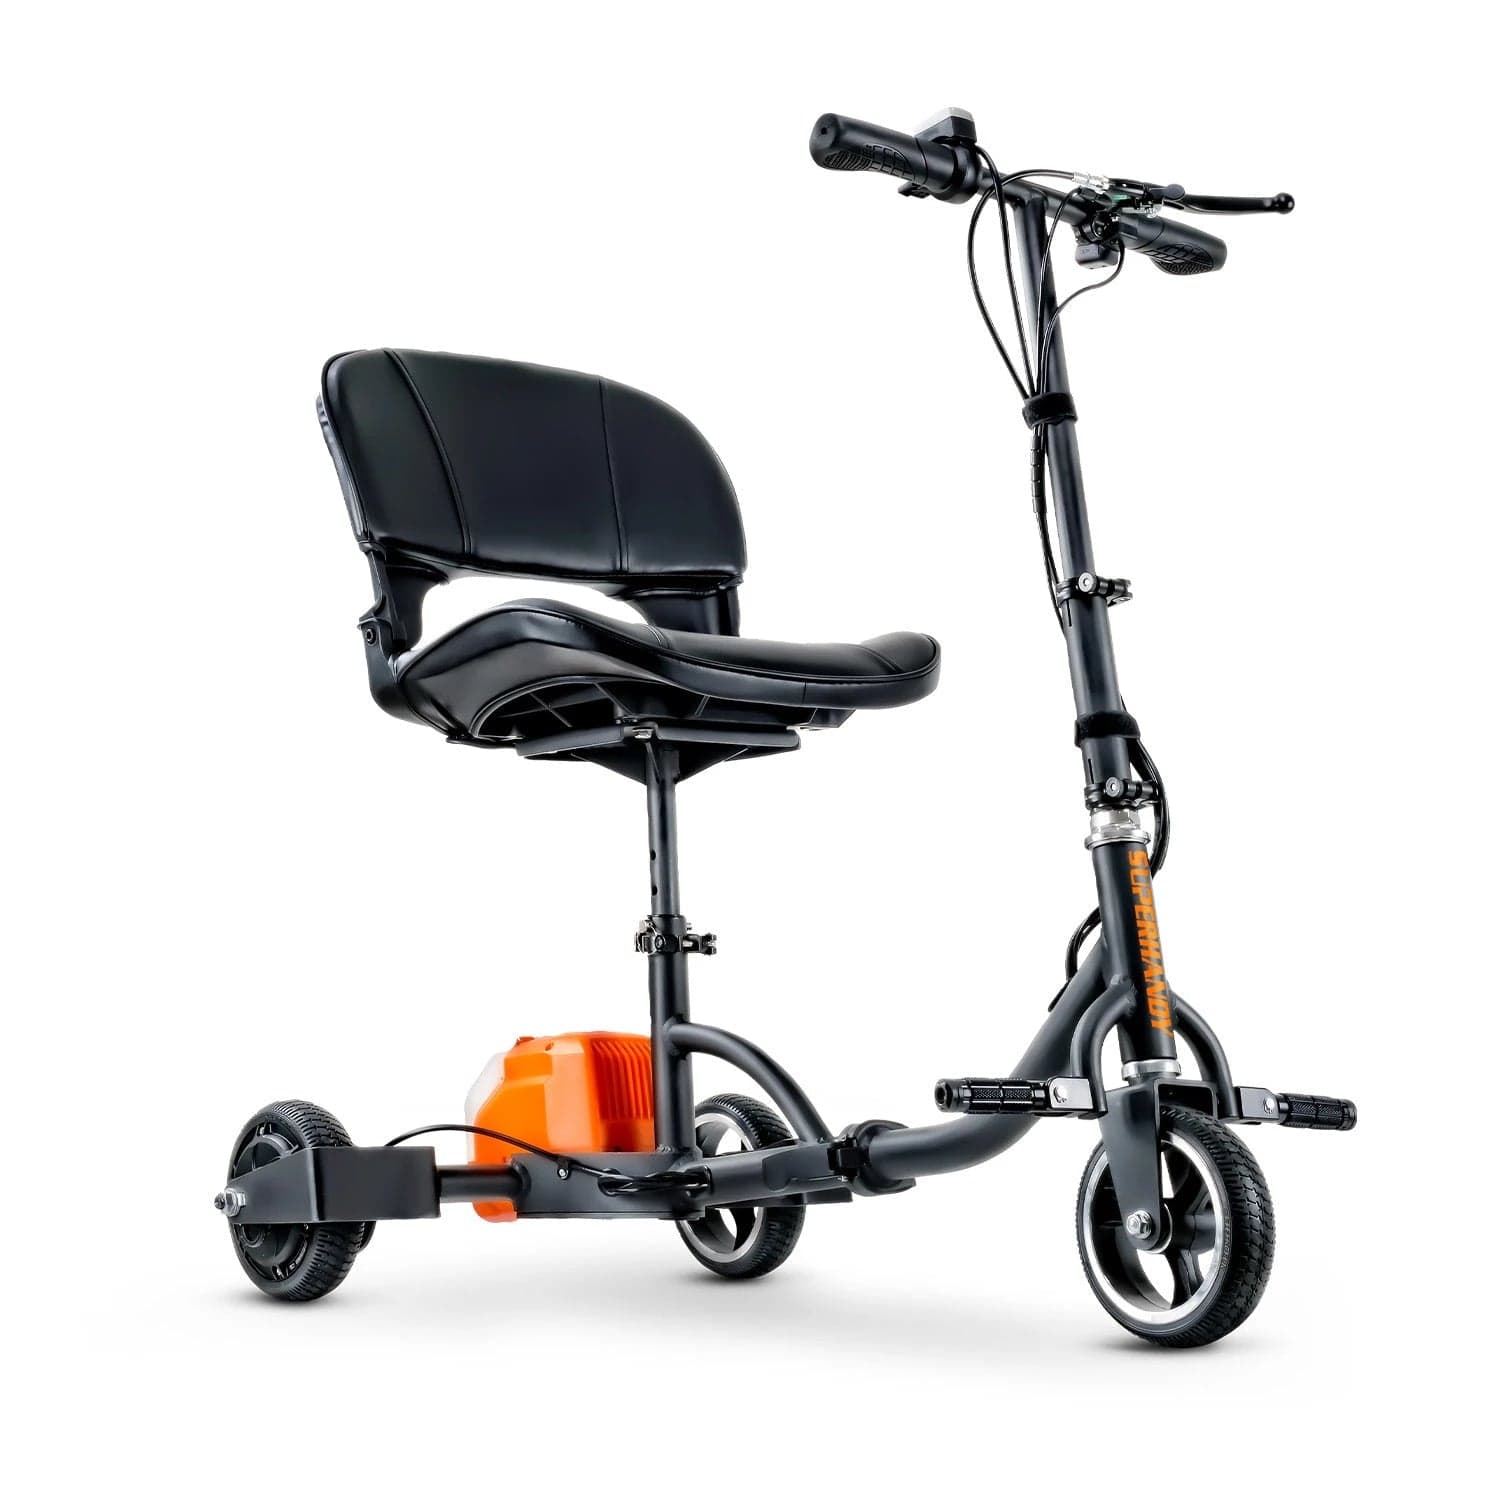 & Power Scooter Electric The Mobility - Outdoor SuperHandy Mobility Scooter Lightest Mobility - Equipment SuperHandy - Shop